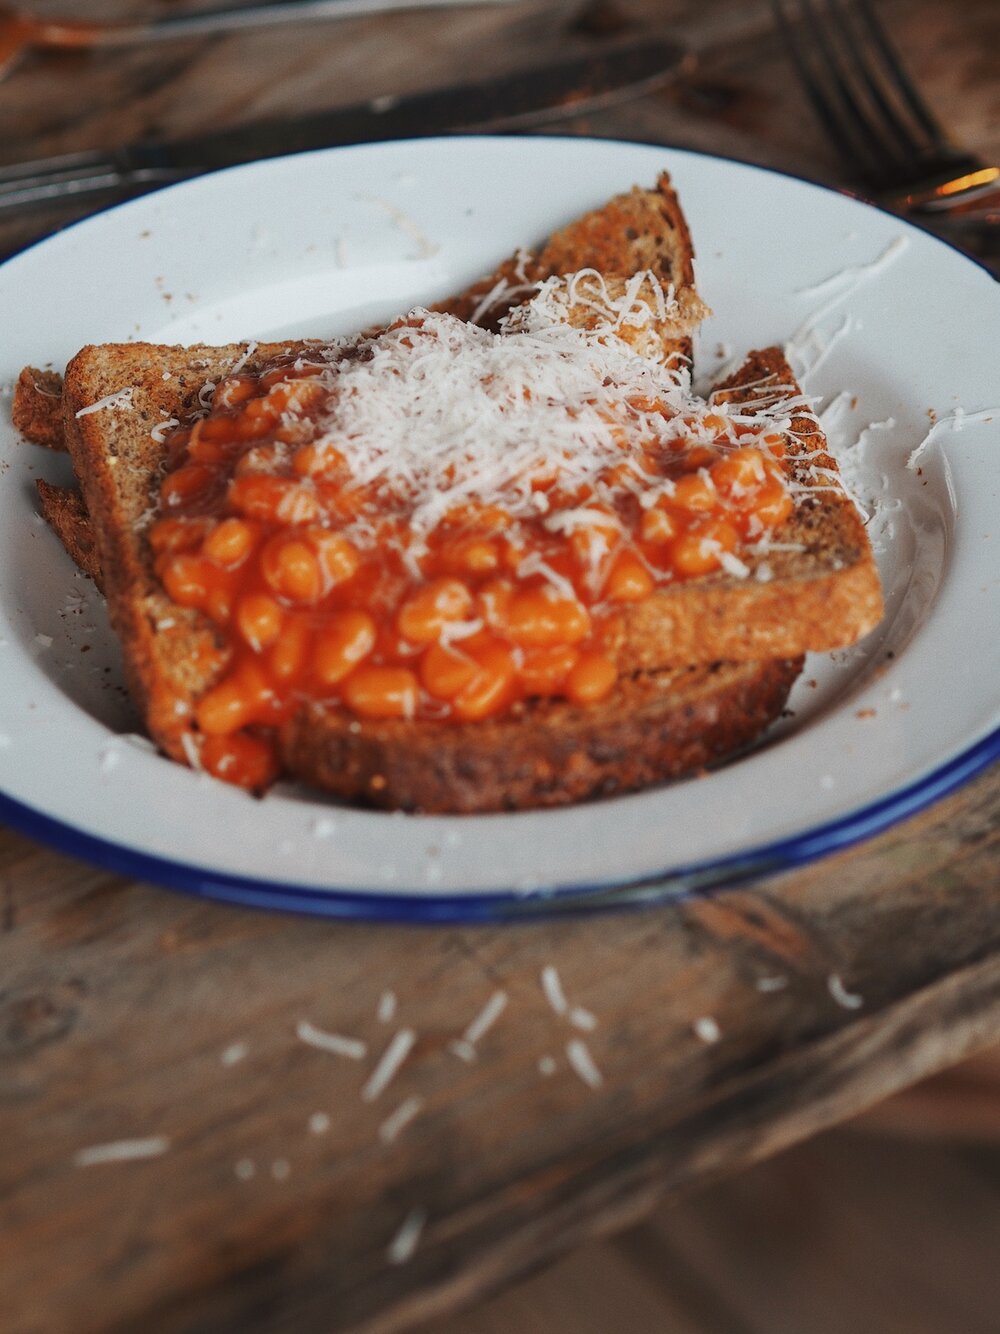  Beans on toast for breakfast at Fforest Farm 